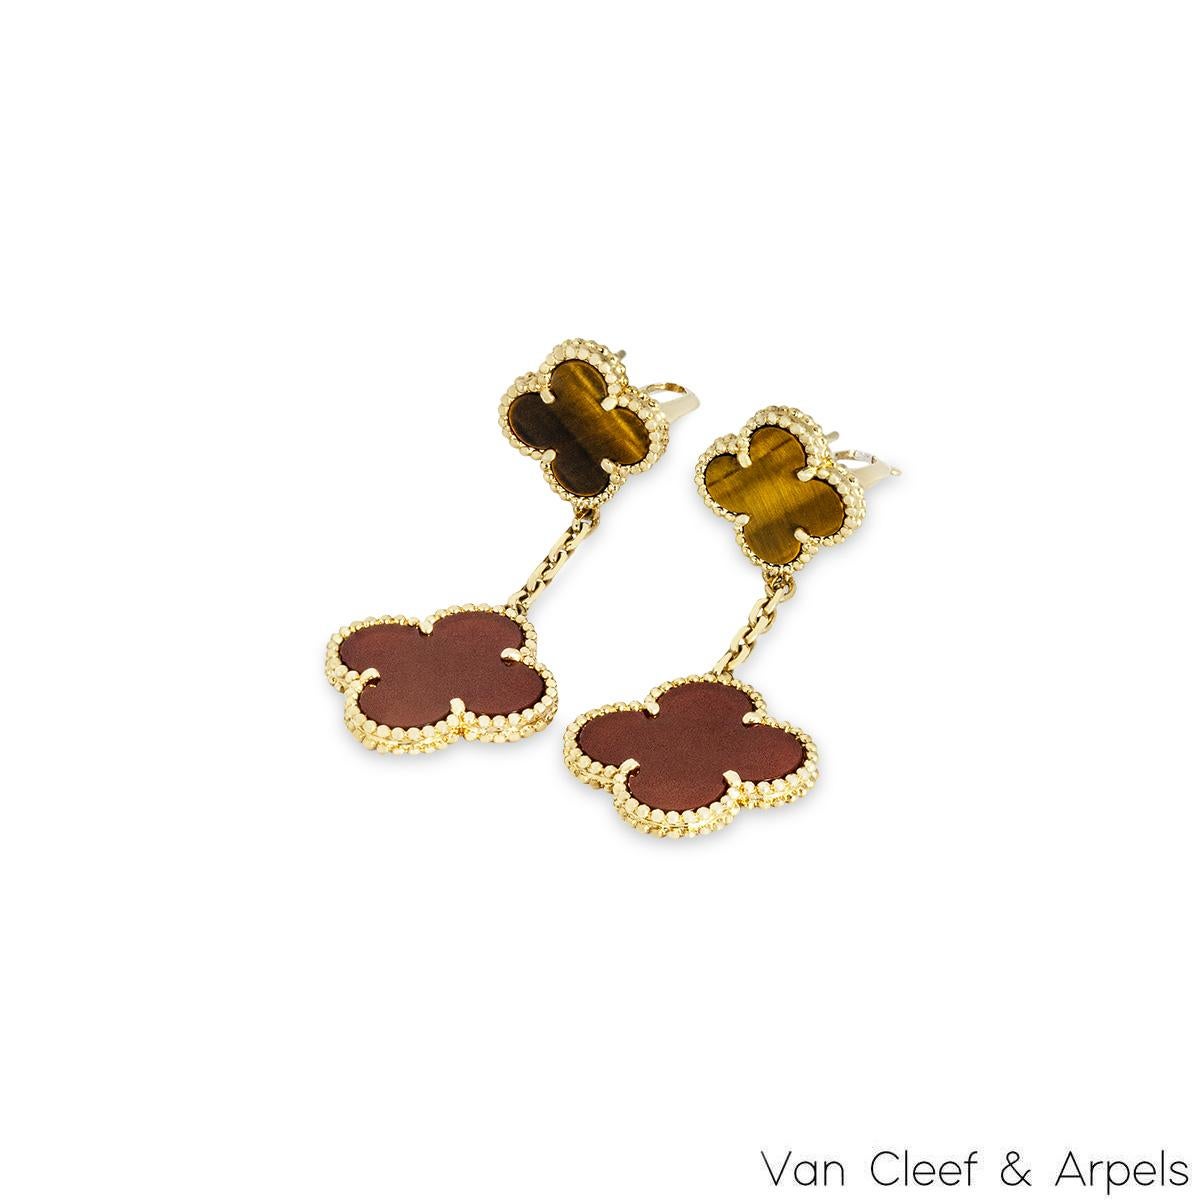 An iconic pair of 18k yellow gold earrings by Van Cleef & Arpels, from the Magic Alhambra collection. Comprising of 2 four-leaf clover motifs alternating in size complemented by a beaded outer edge, the first motif is set with carnelian and the next